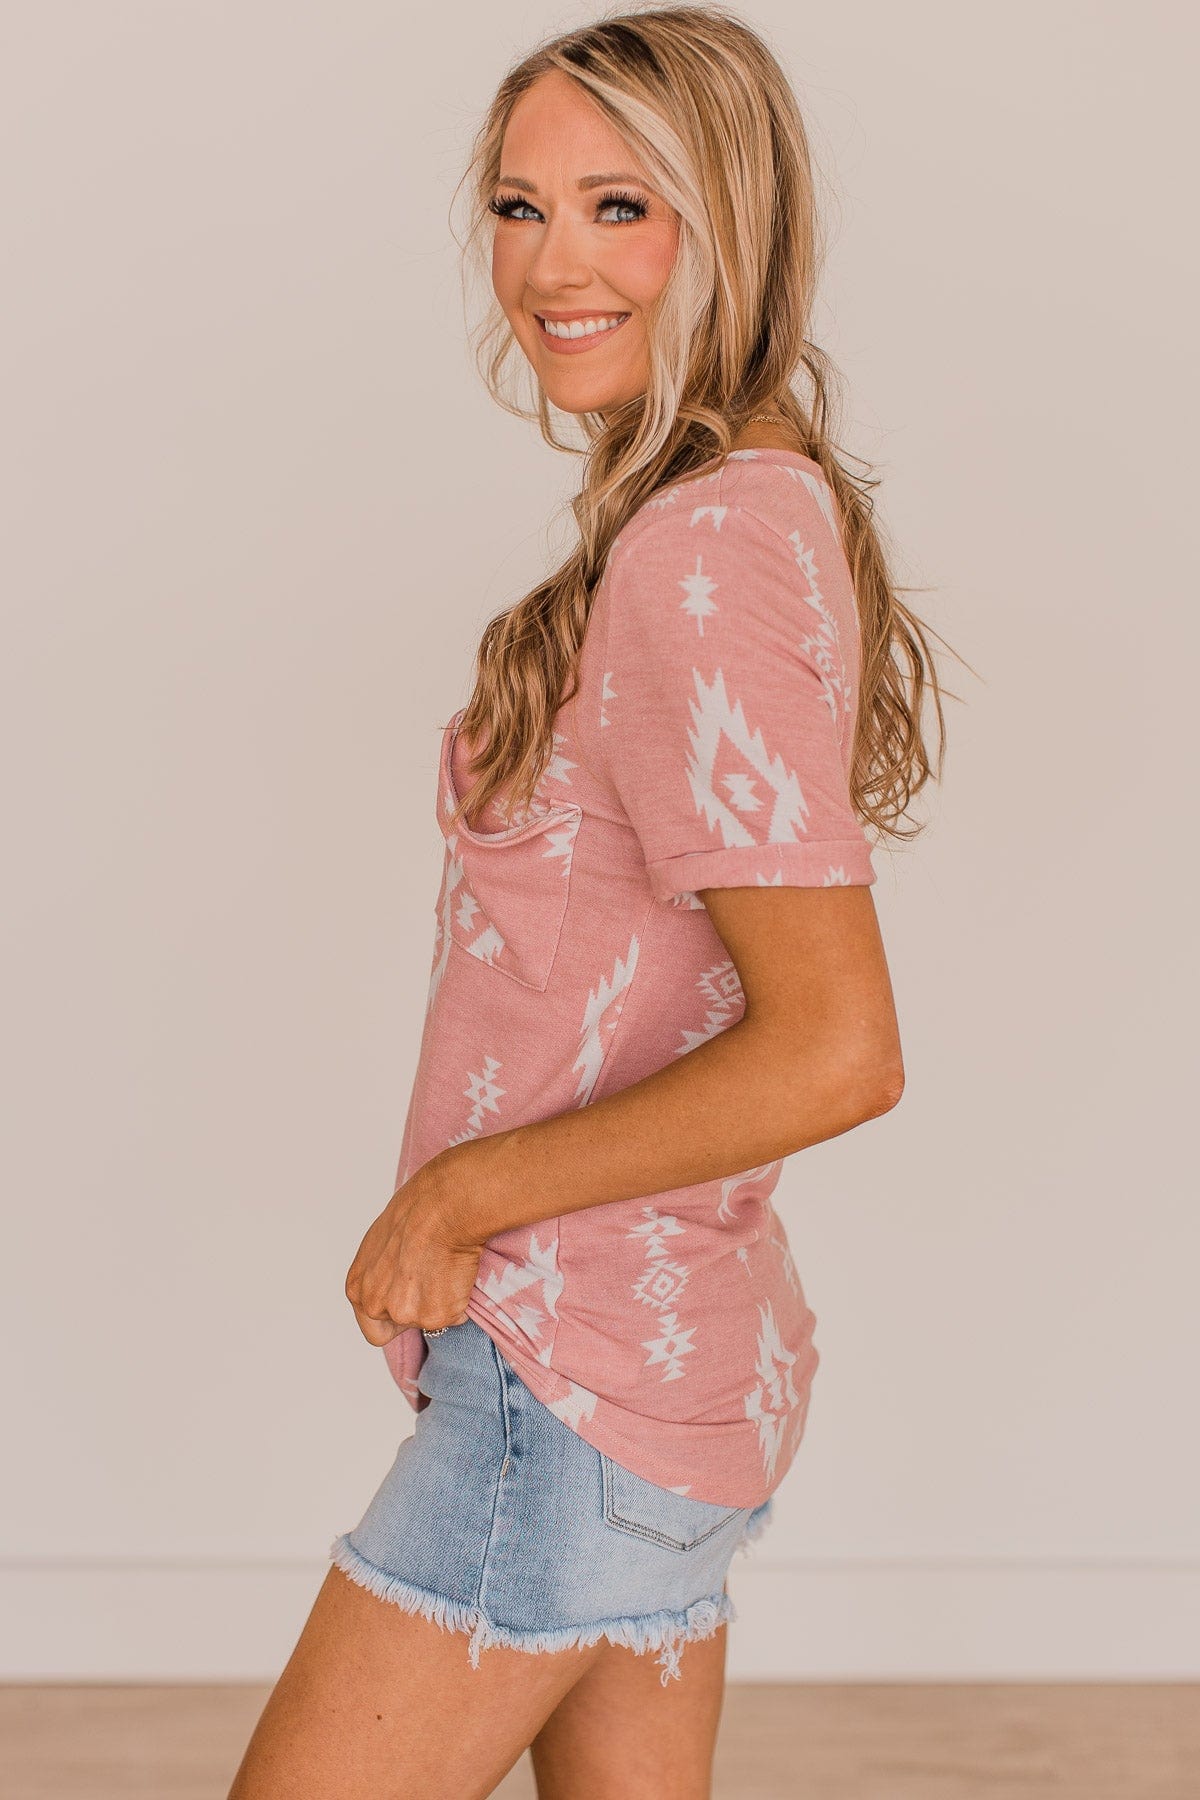 Spread Your Wings Aztec Print Top- Dusty Pink